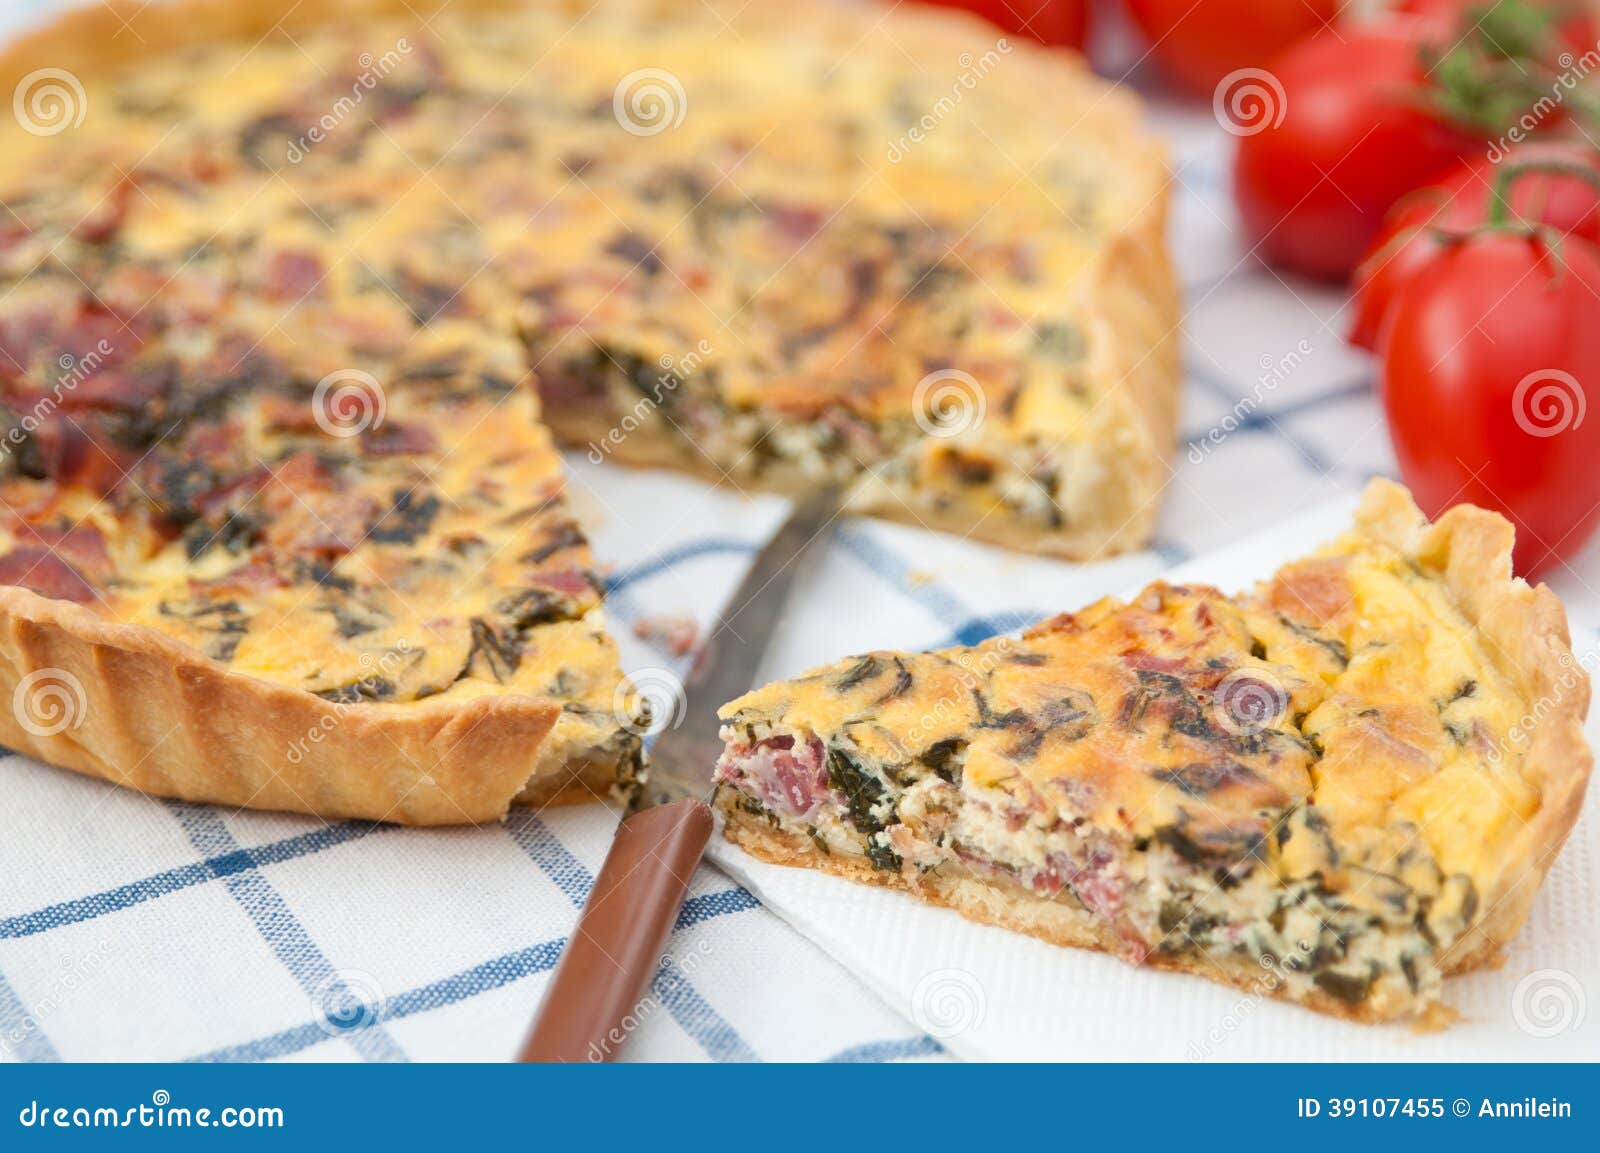 Quiche Lorraine with Spinach Stock Image - Image of gourmet, parsley ...